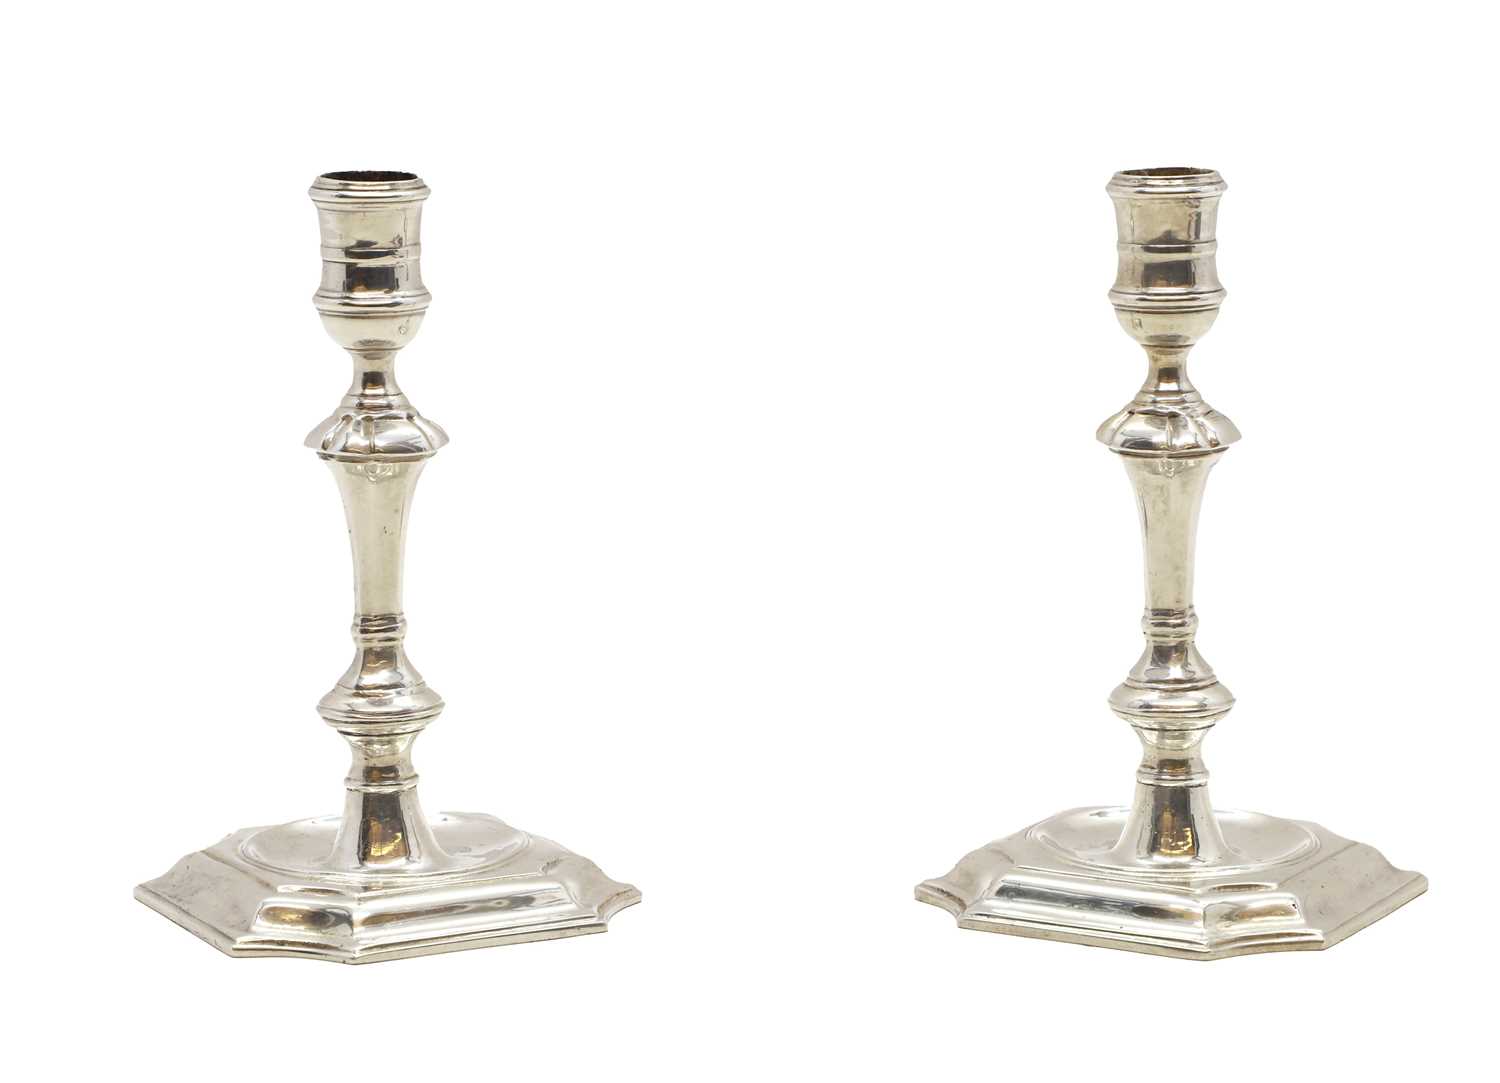 A pair of George II-style cast silver candlesticks